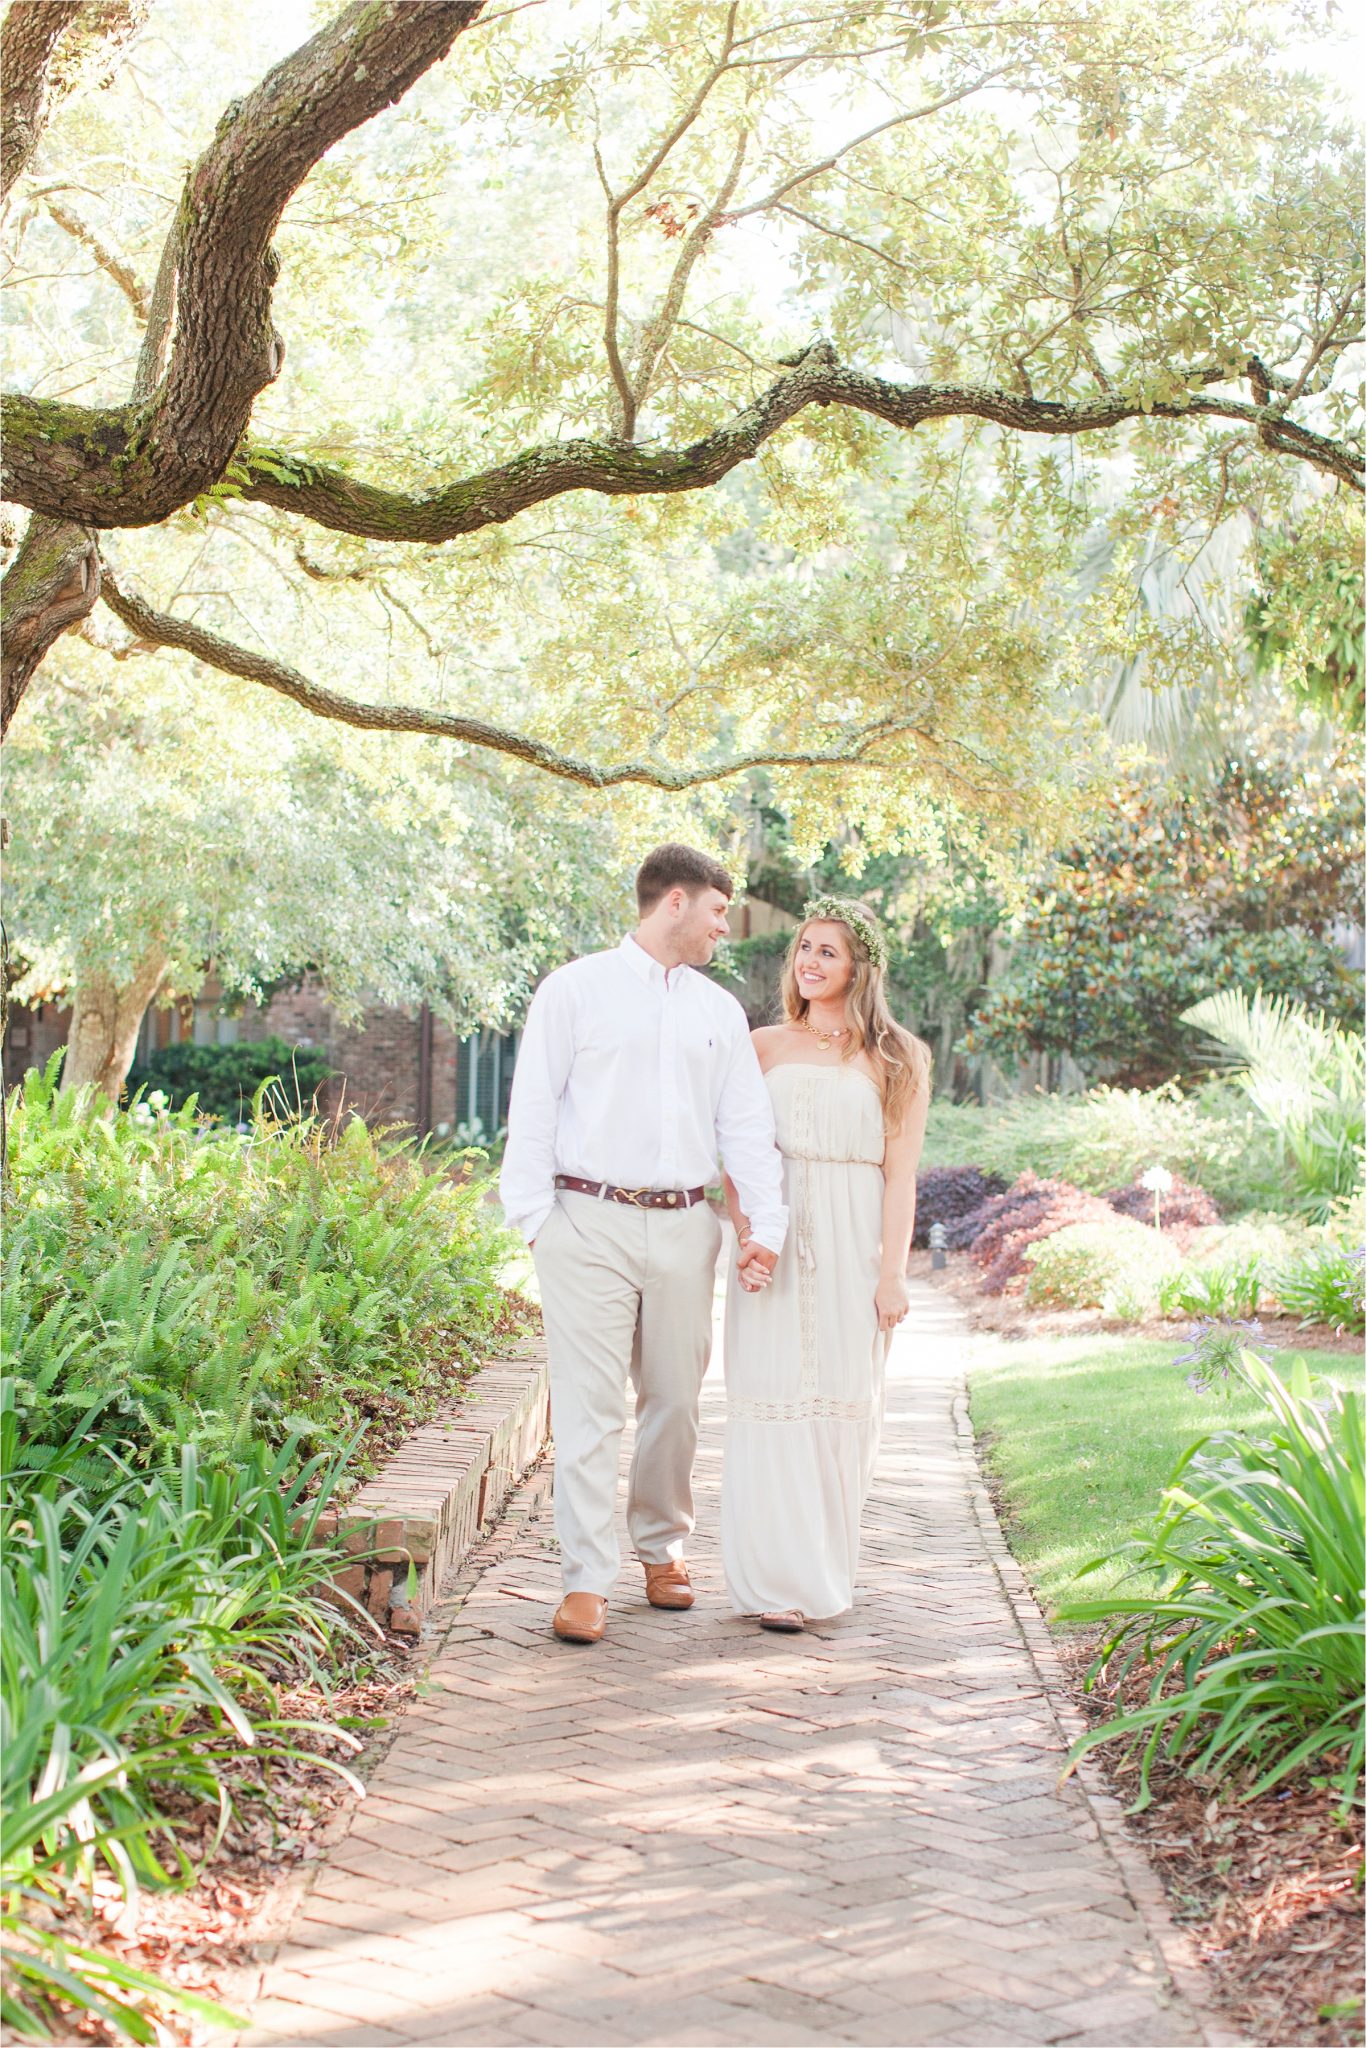 Point Clear Engagement Session at the Grand Hotel-Mary Catherine + Chase-Whimsical engagement shoot-Neutral engagement shoot-Fairytale engagement shoot